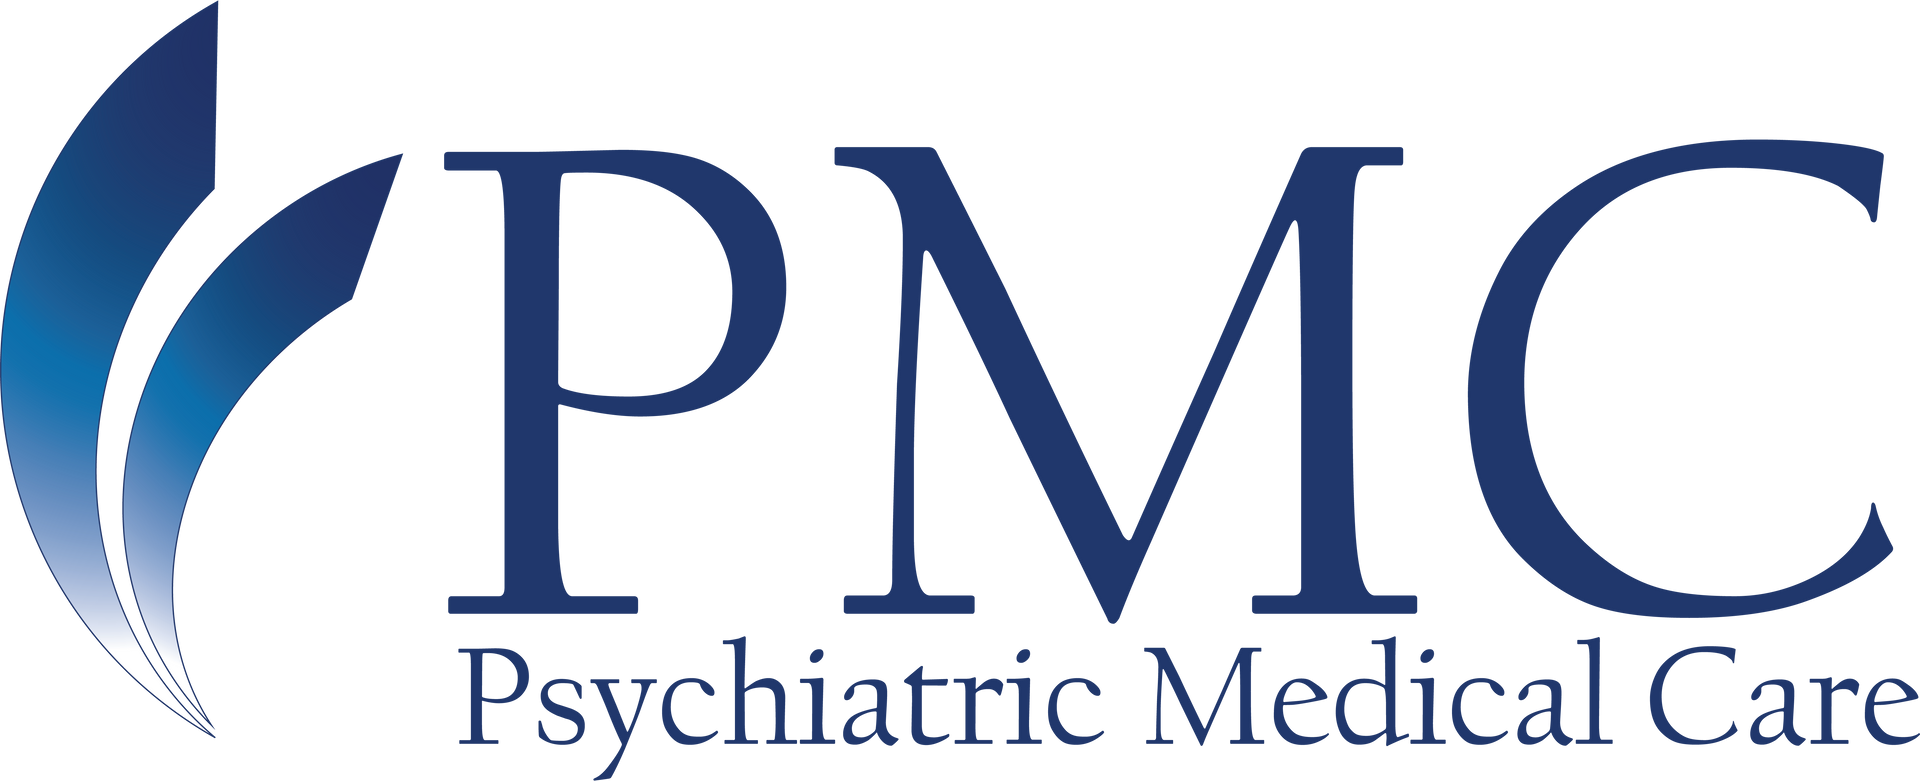 The logo for pmc psychiatric medical care is blue and white